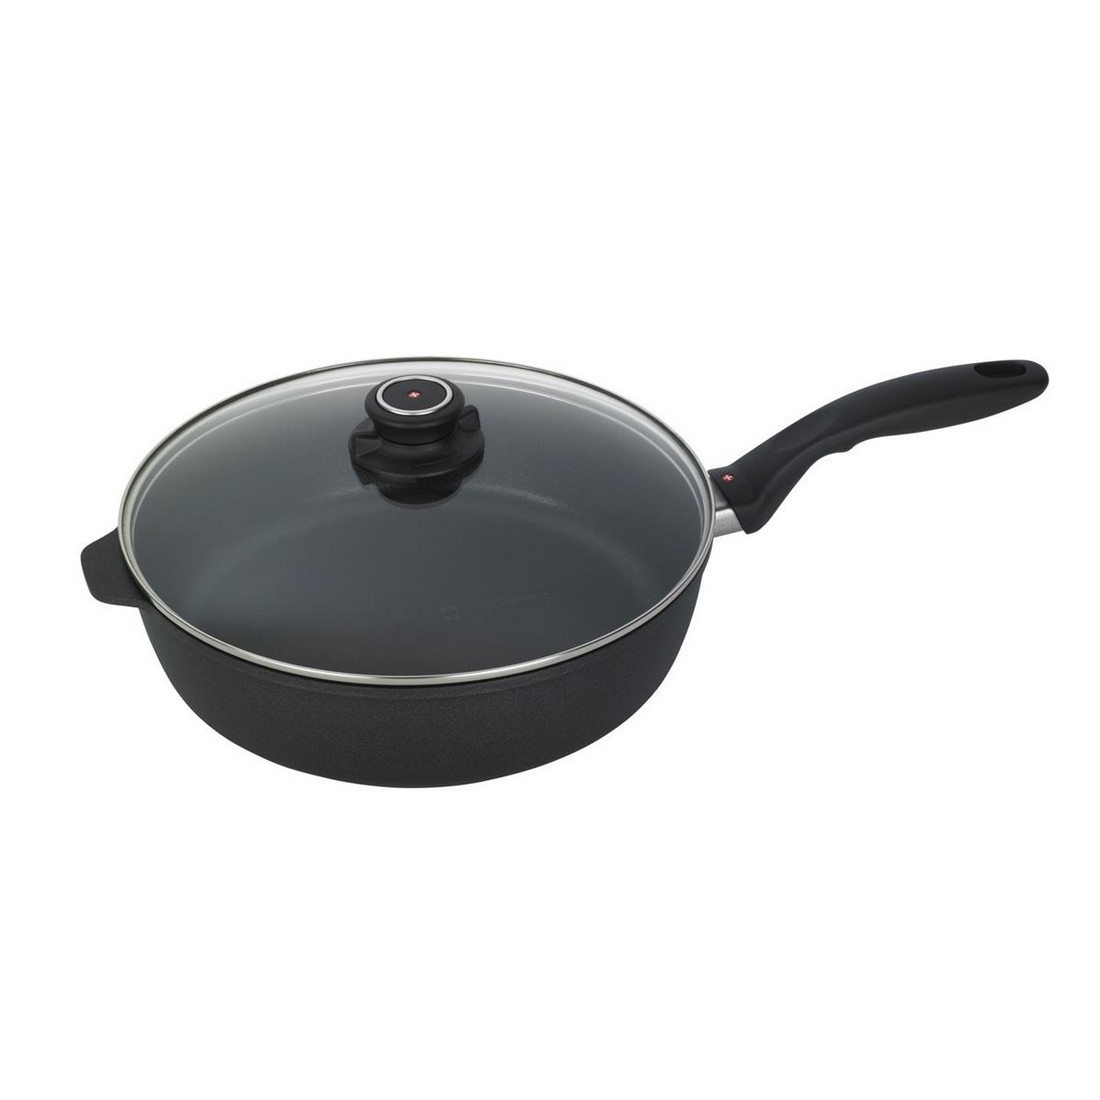 xd 4.1 l non-stick frying pan - 28 cm with glass lid - induction